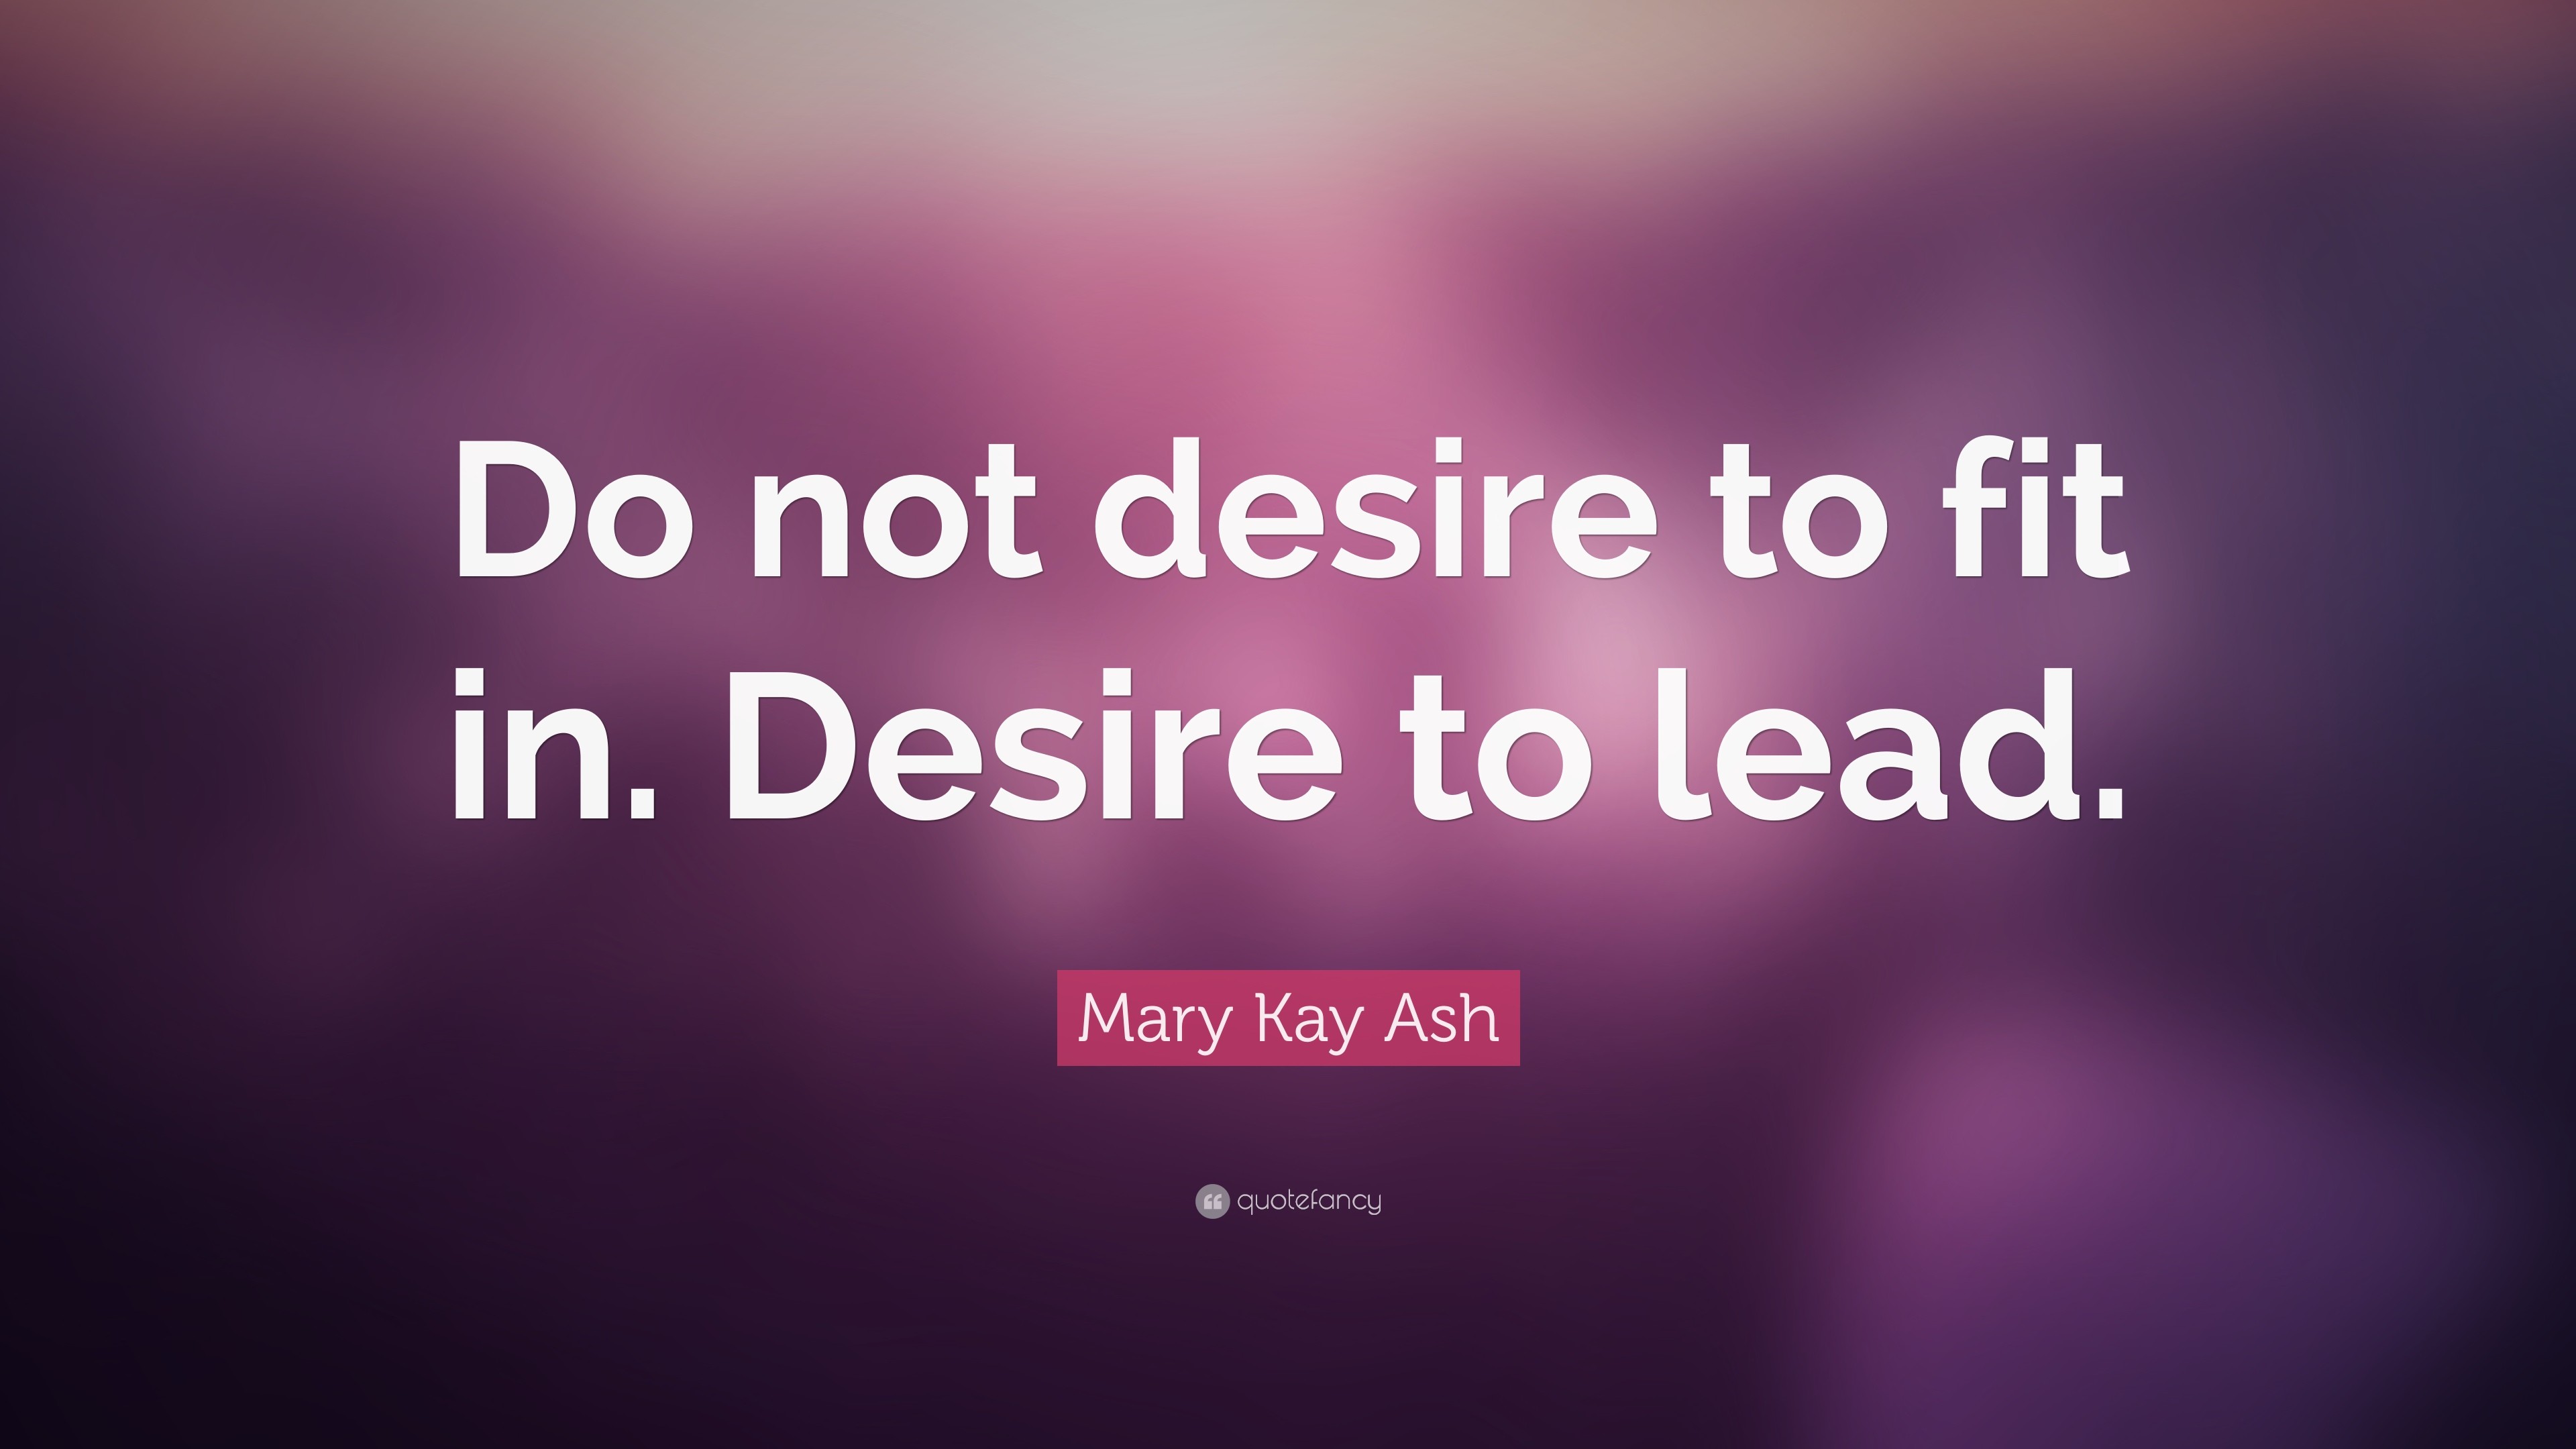 3840x2160 Mary Kay Ash Quote: “Do not desire to fit in. Desire to lead